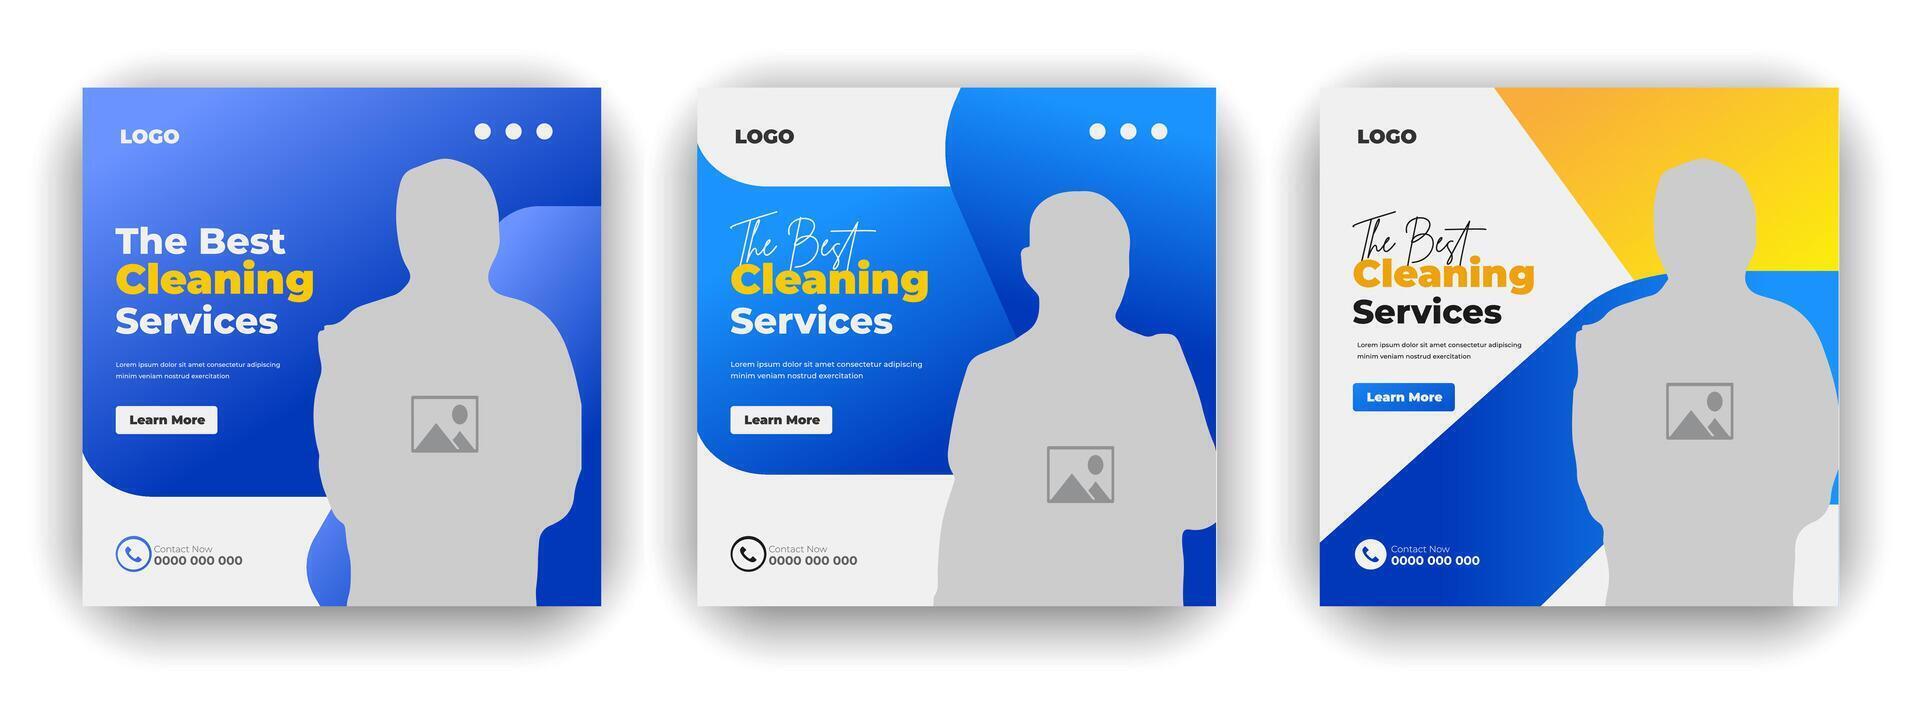 Home cleaning service or Reliable clean flyer and social media post design template vector